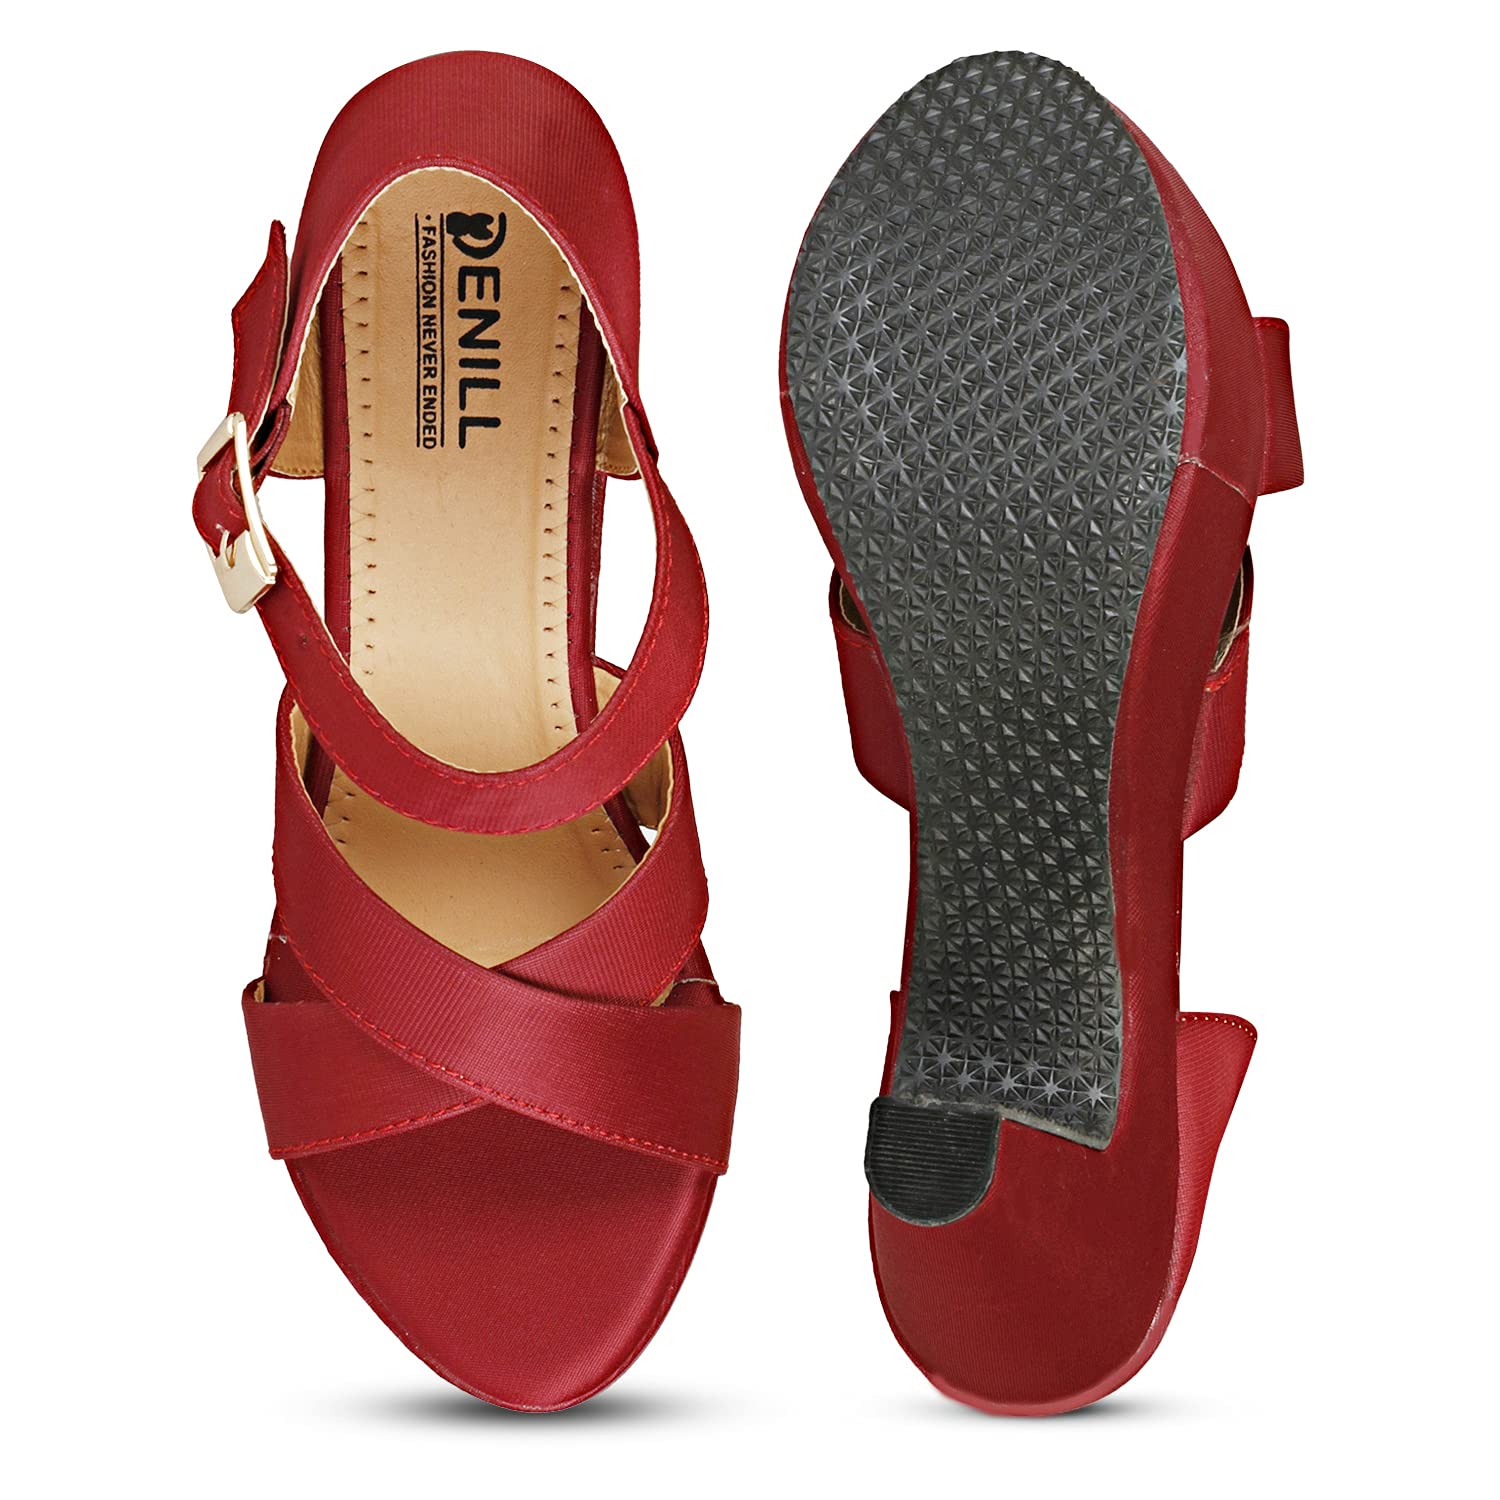 Denill Womens And Girls Fashion Sandal (Block Heels) -  Fashion Sandals in Sri Lanka from Arcade Online Shopping - Just Rs. 4599!